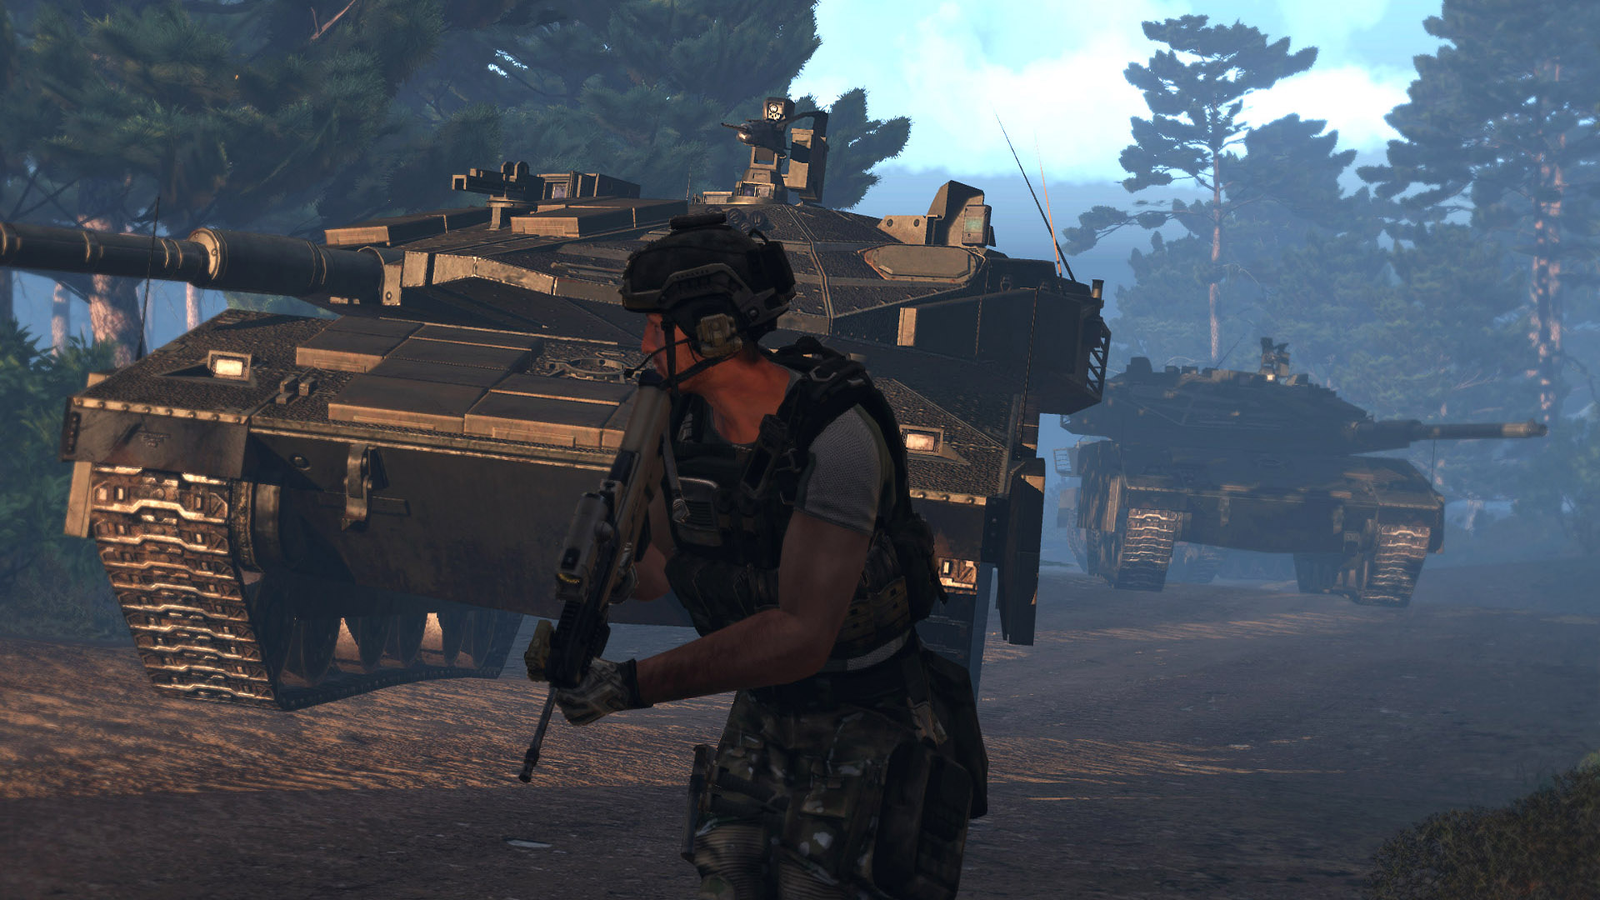 Arma 3 [Official Trailer] Pc , Ps4 , Xbox One 